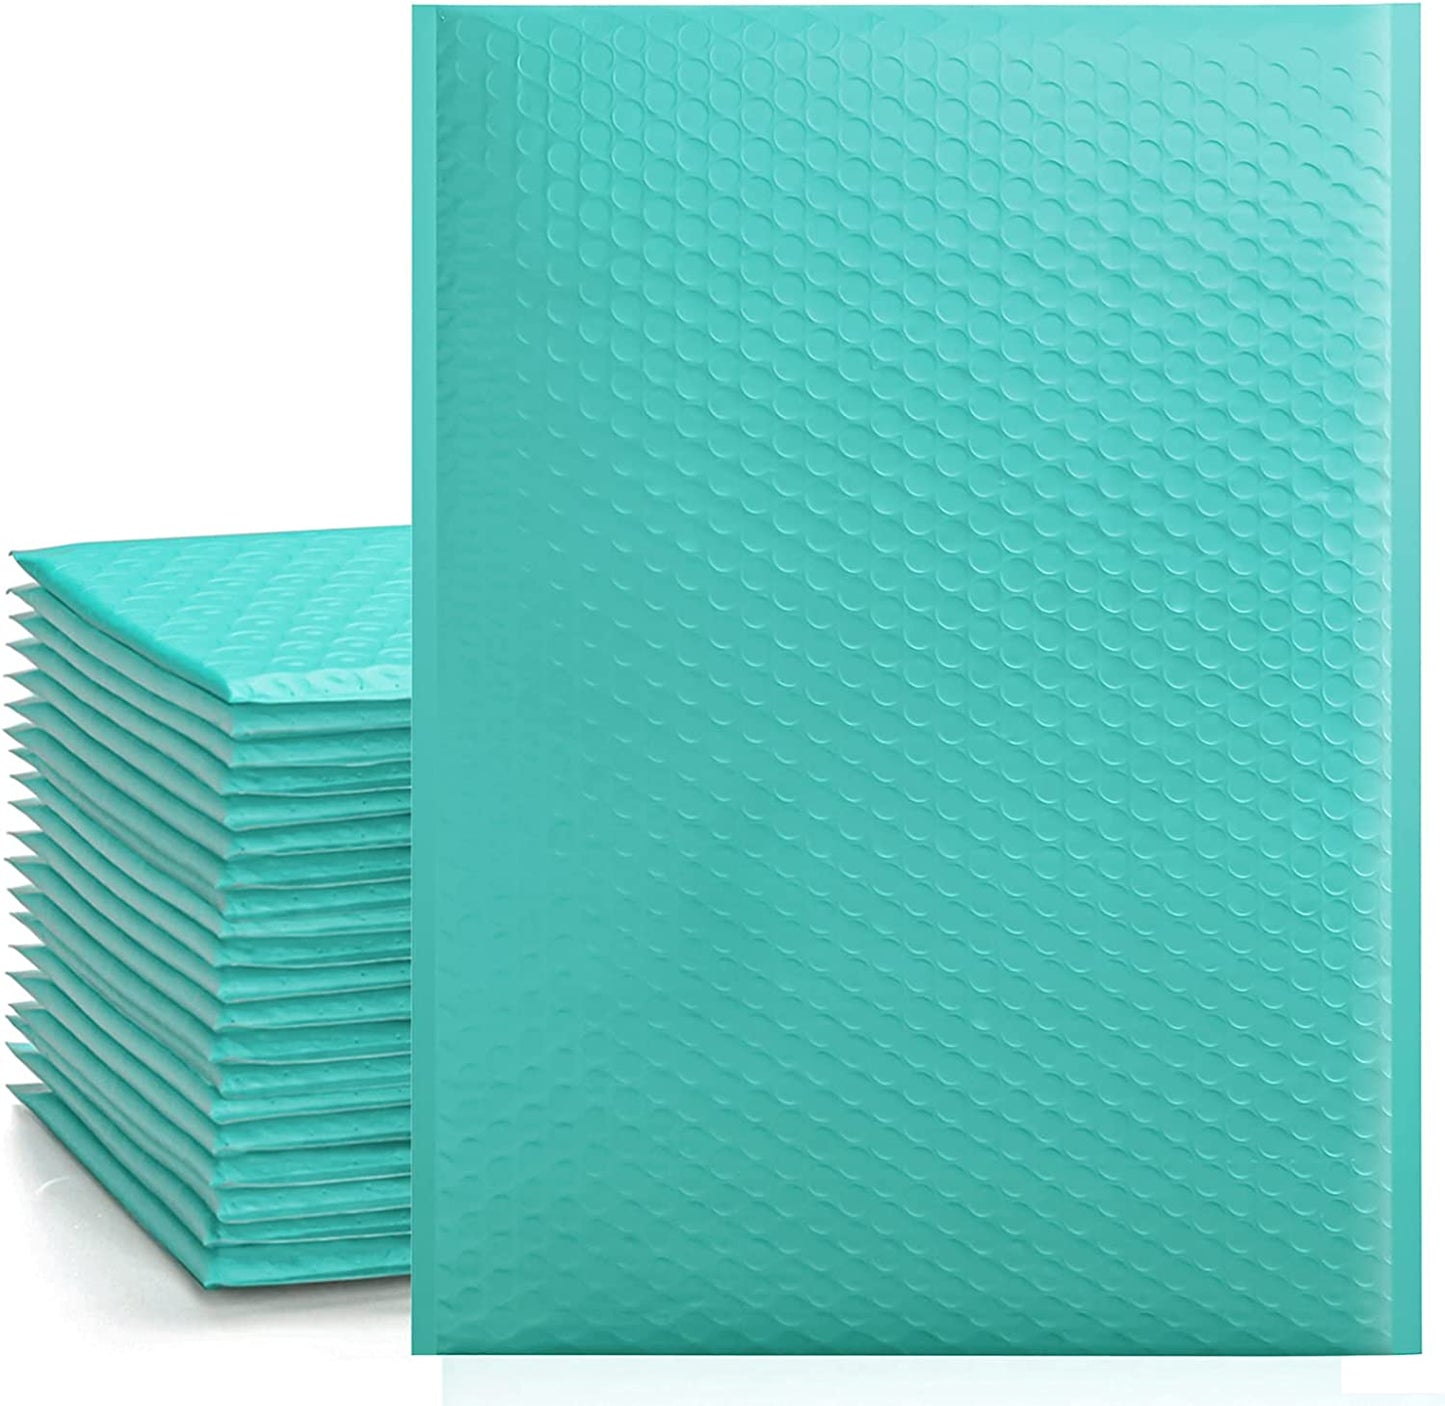 10.5x16 Bubble-Mailer Padded Envelope | Teal